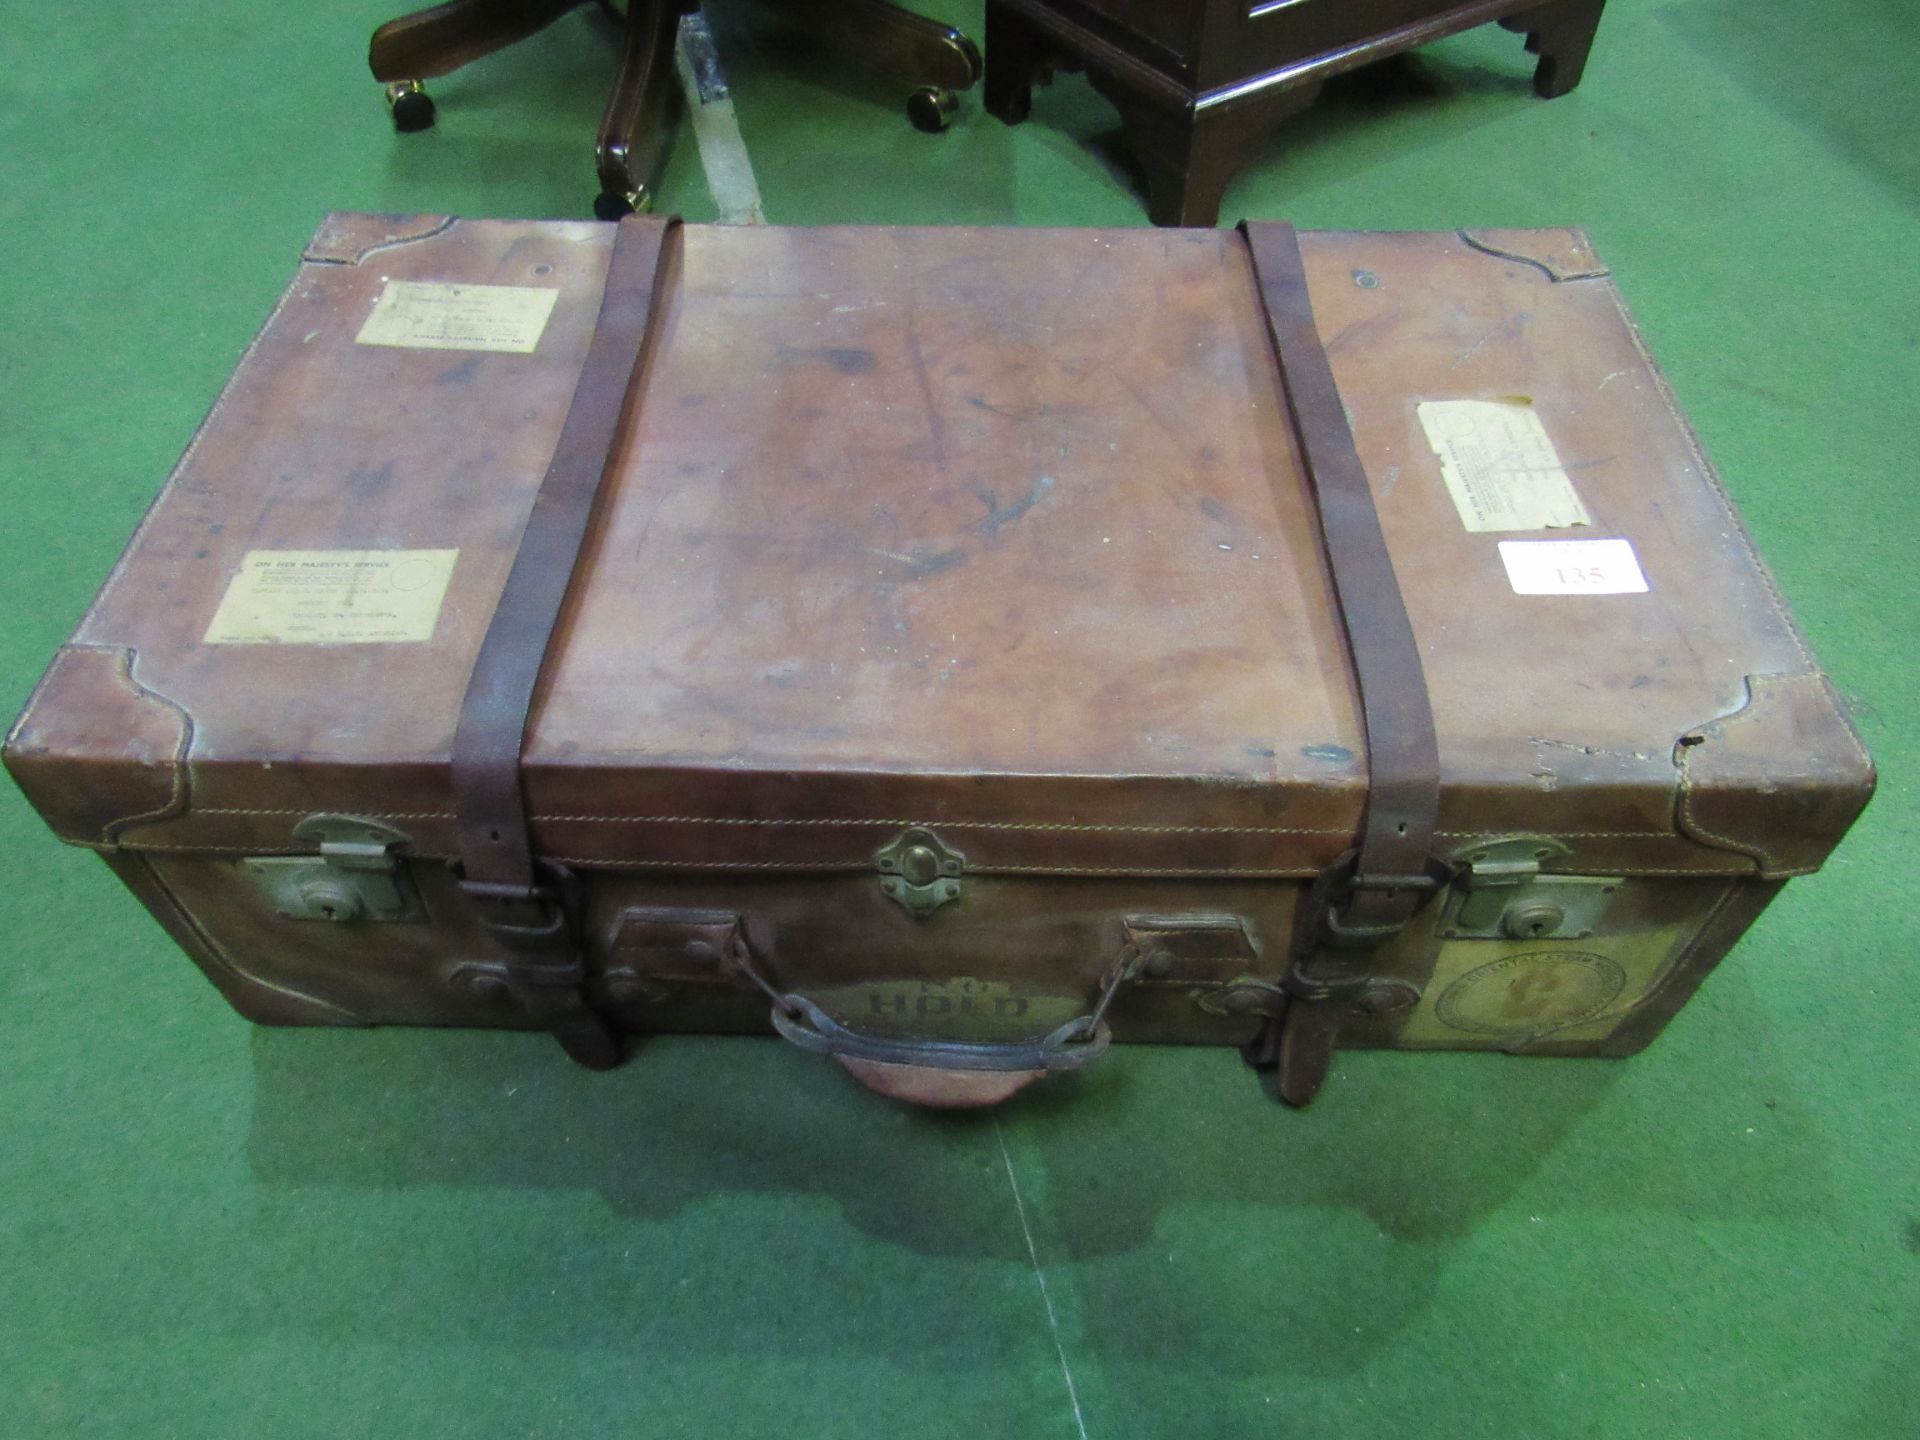 Large leather suitcase complete with straps, 80 x 26 x 40cms. Estimate £20-40.